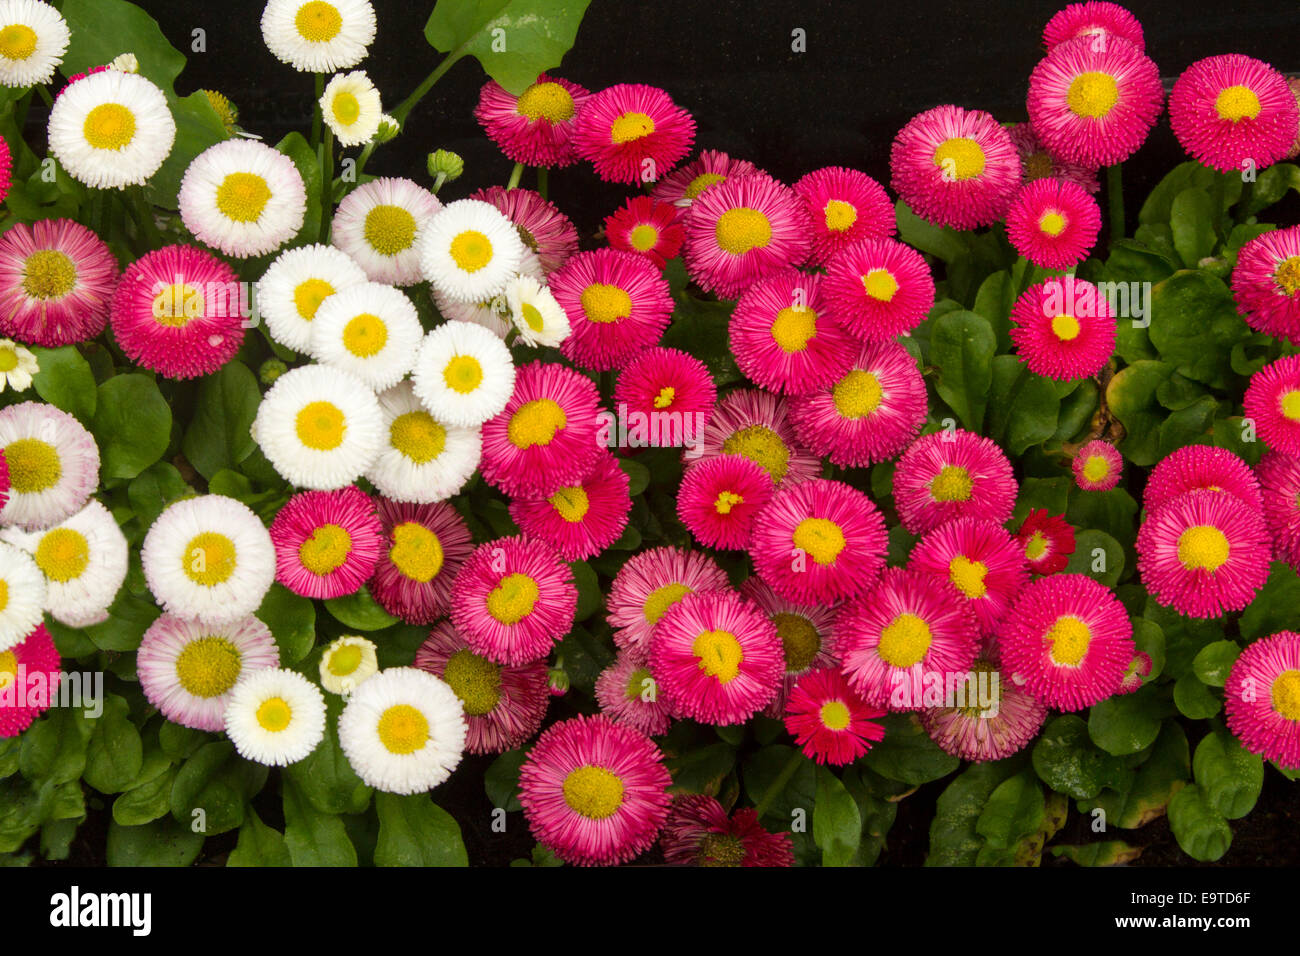 Spectacular cluster of bright red daisies with yellow centres - Bellis perennis Tasso series -  beside white ones on background of emerald foliage Stock Photo